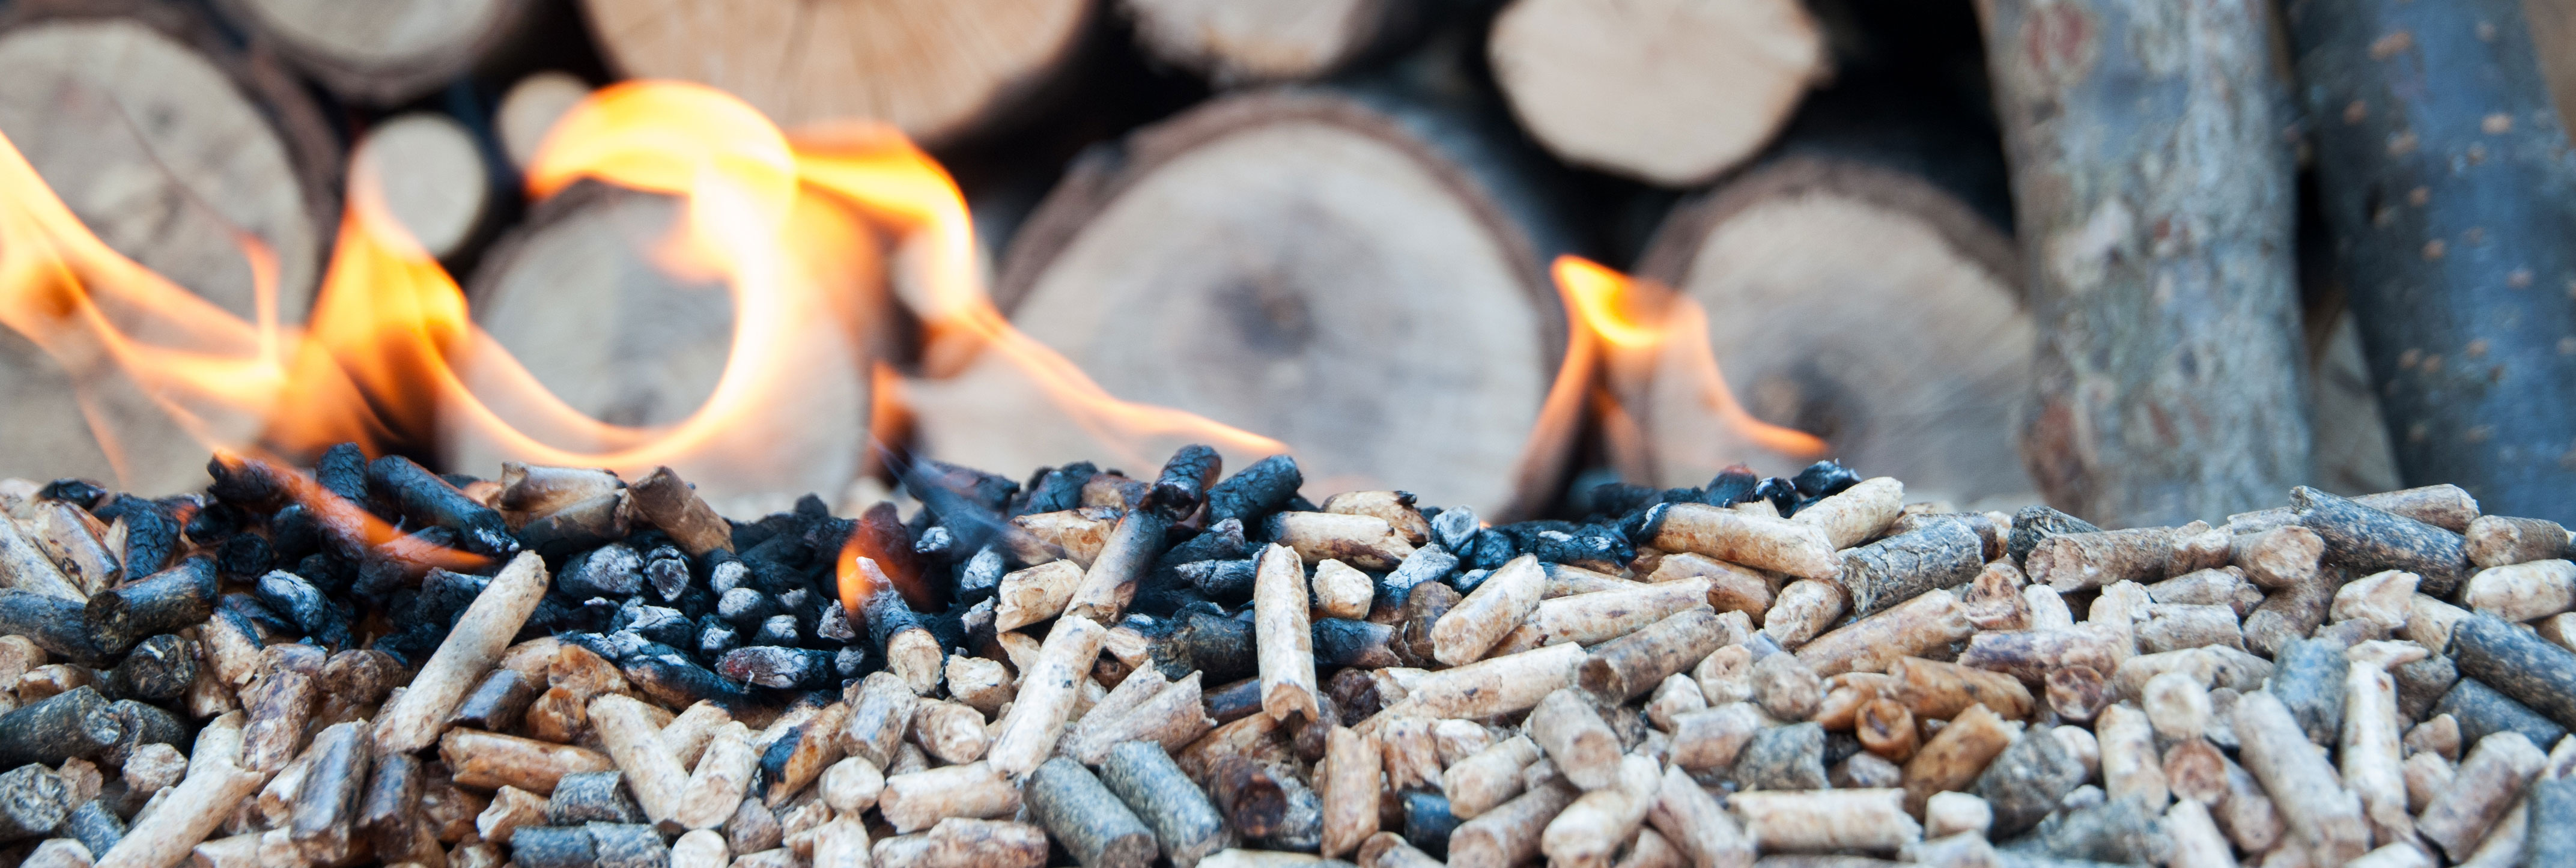 New opportunities for biomass energy development under the background of carbon neutrality